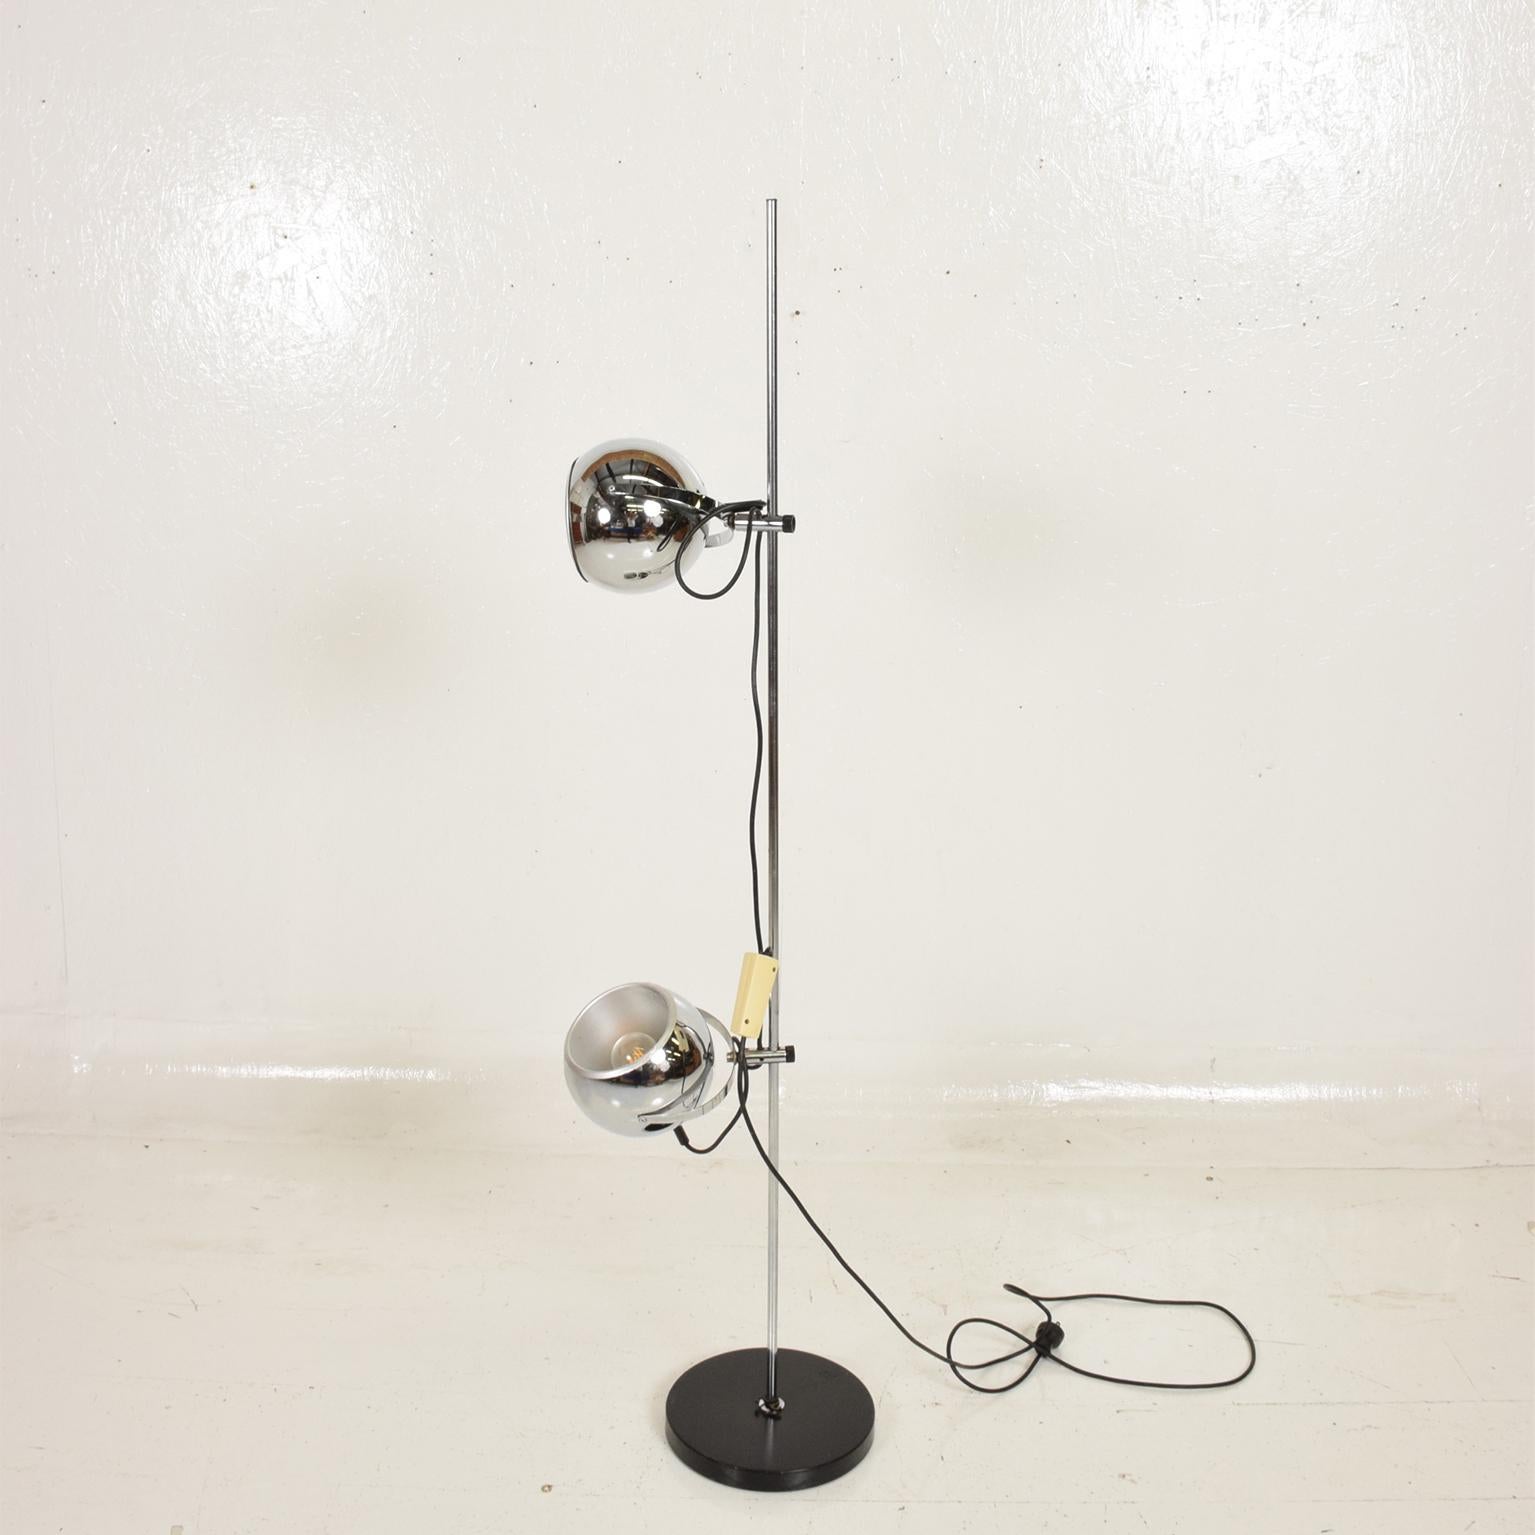 For your consideration, a Mid-Century Modern chrome floor lamp by Robert Sonneman.

Beautiful chrome-plated floor lamp with two adjustable shades in the shape on a sphere.

The USA circa 1970s. Unmarked, no label present. 

Dimensions: 60